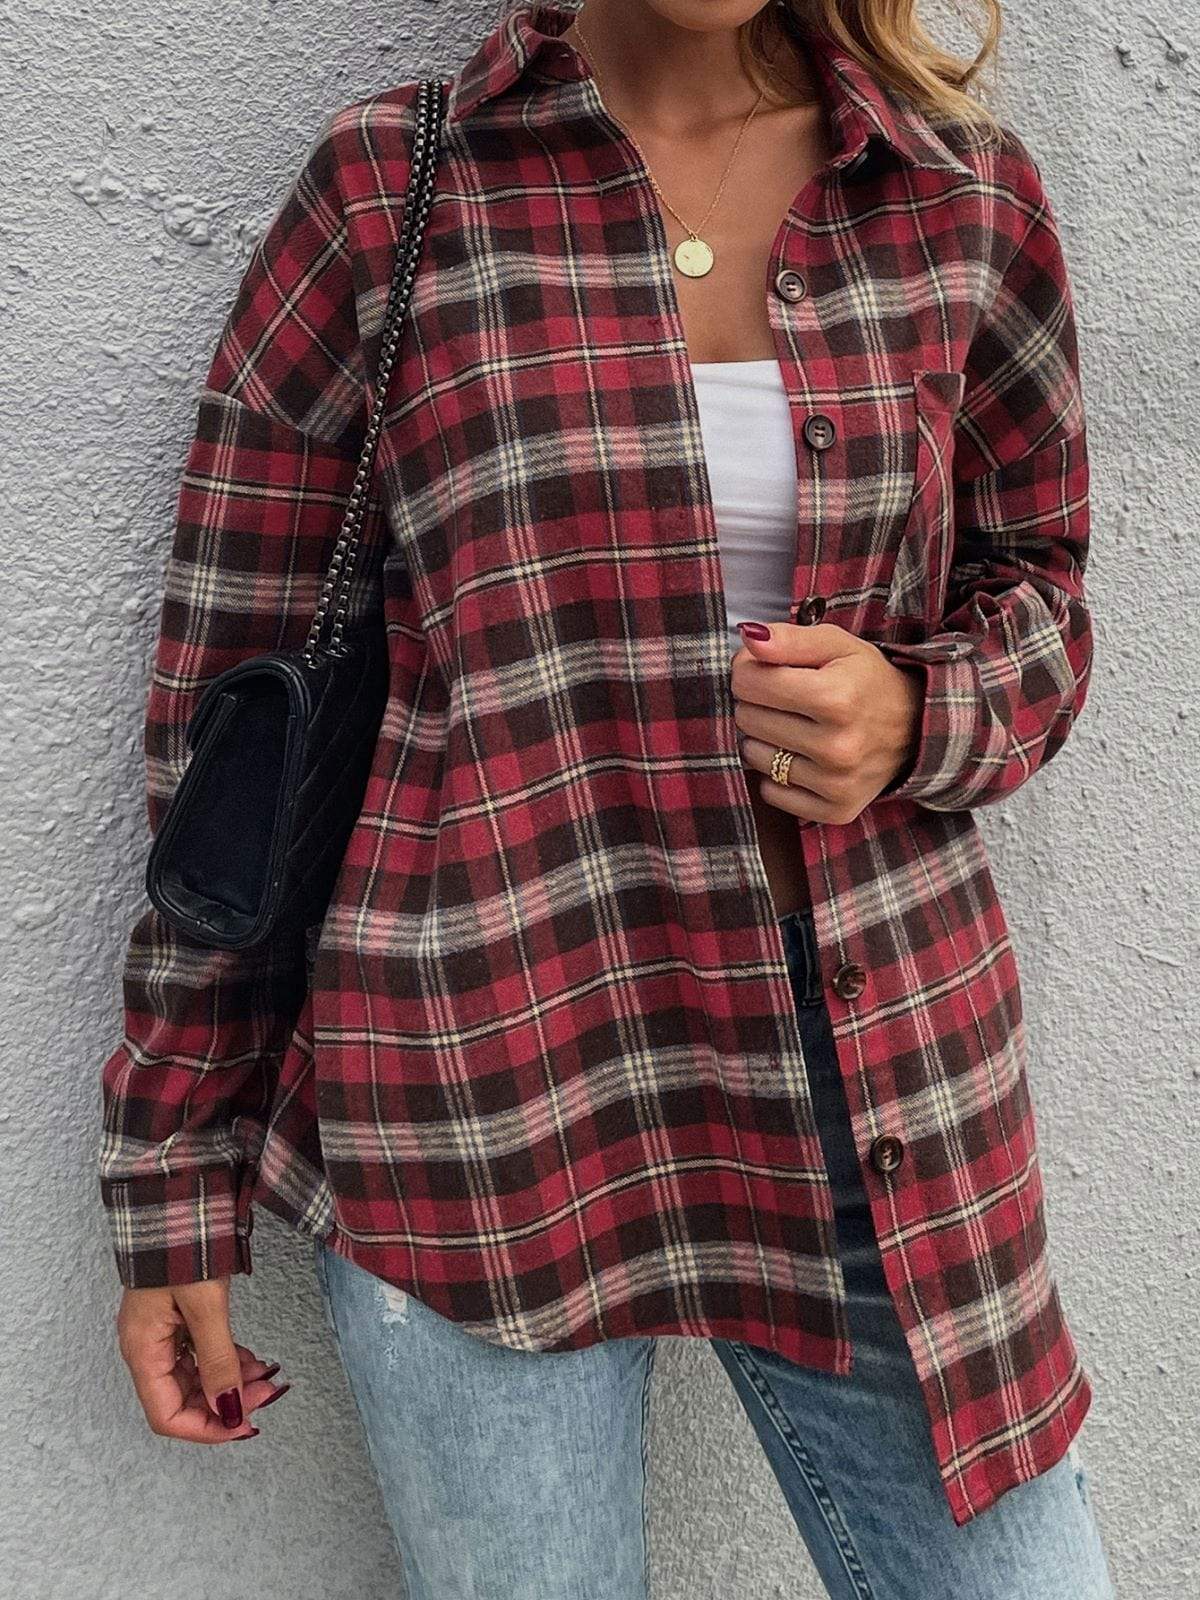 Anna-Kaci Plaid Button Up Flannel for Women with Shirt Pocket Collared Neck